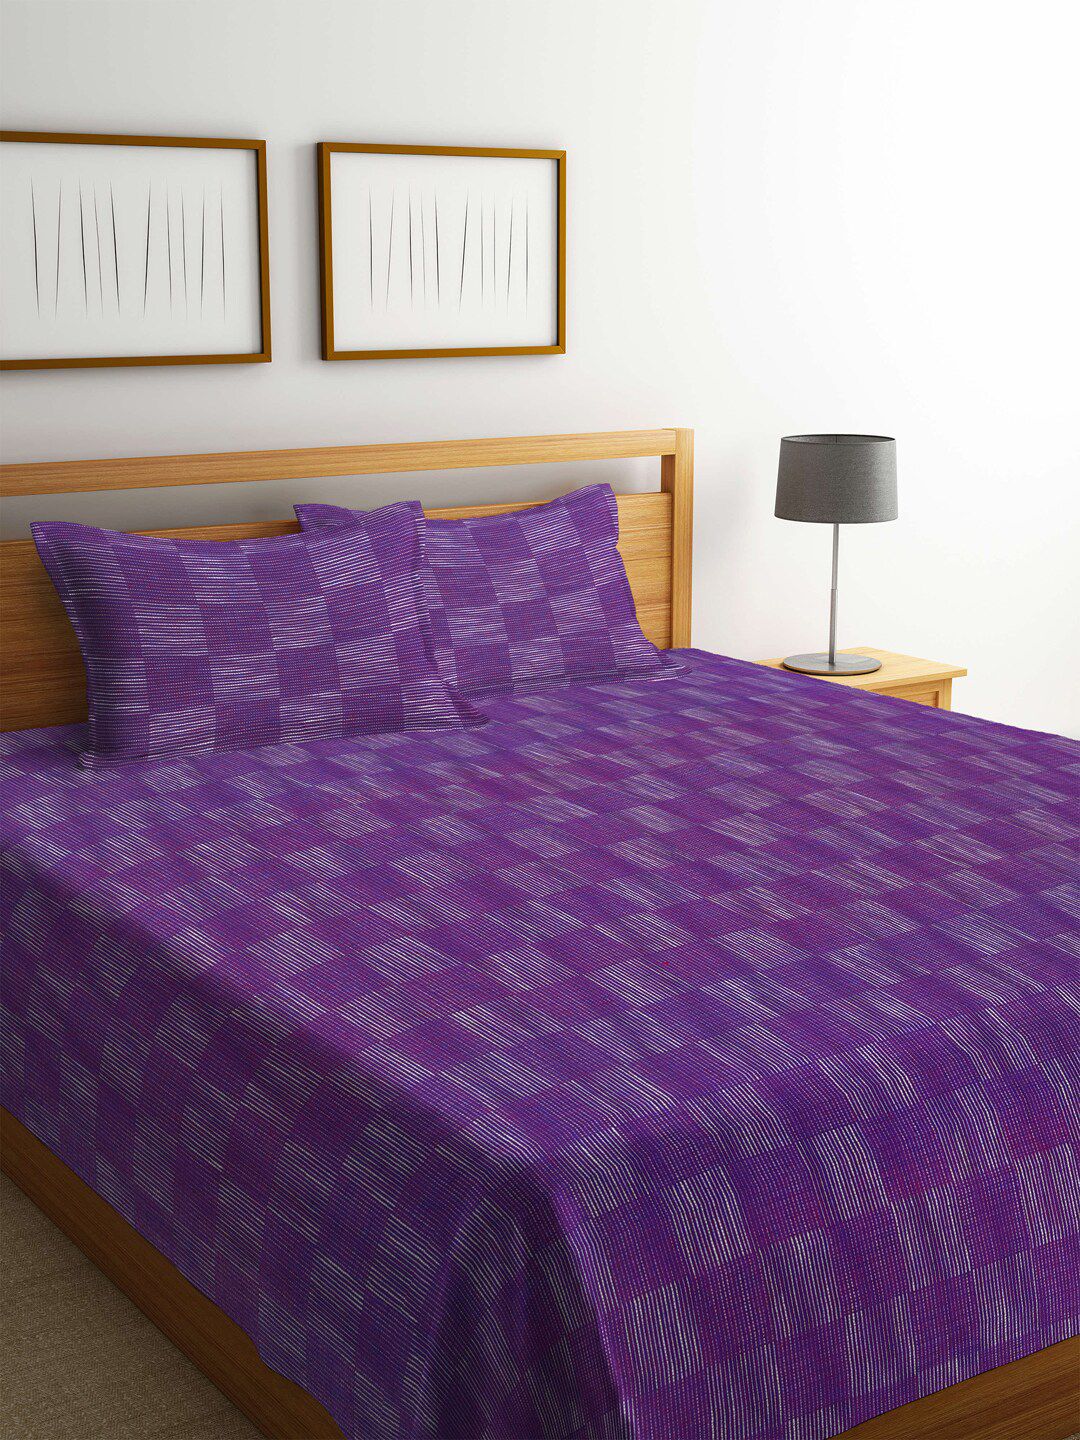 Arrabi Unisex Violet & White Checked Cotton Double Size Bedcover with 2 Pillow Cover Price in India